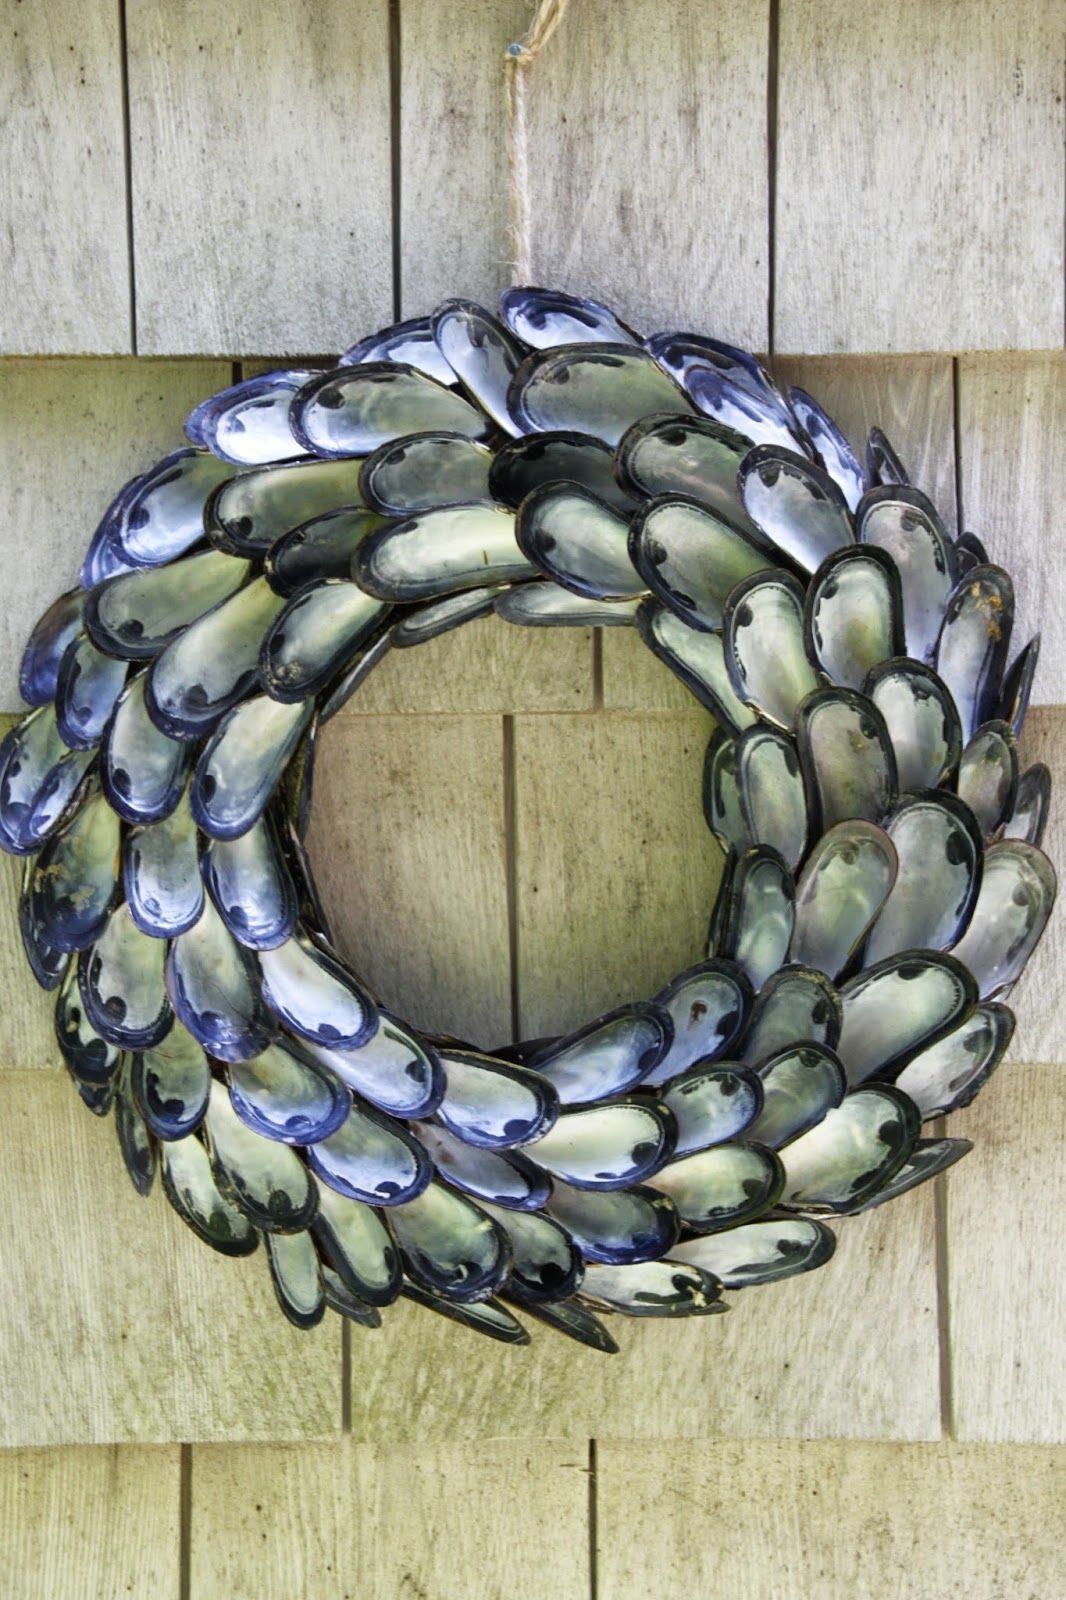 A Coastal Inspired Shell Wreath -   12 mussel shell crafts
 ideas